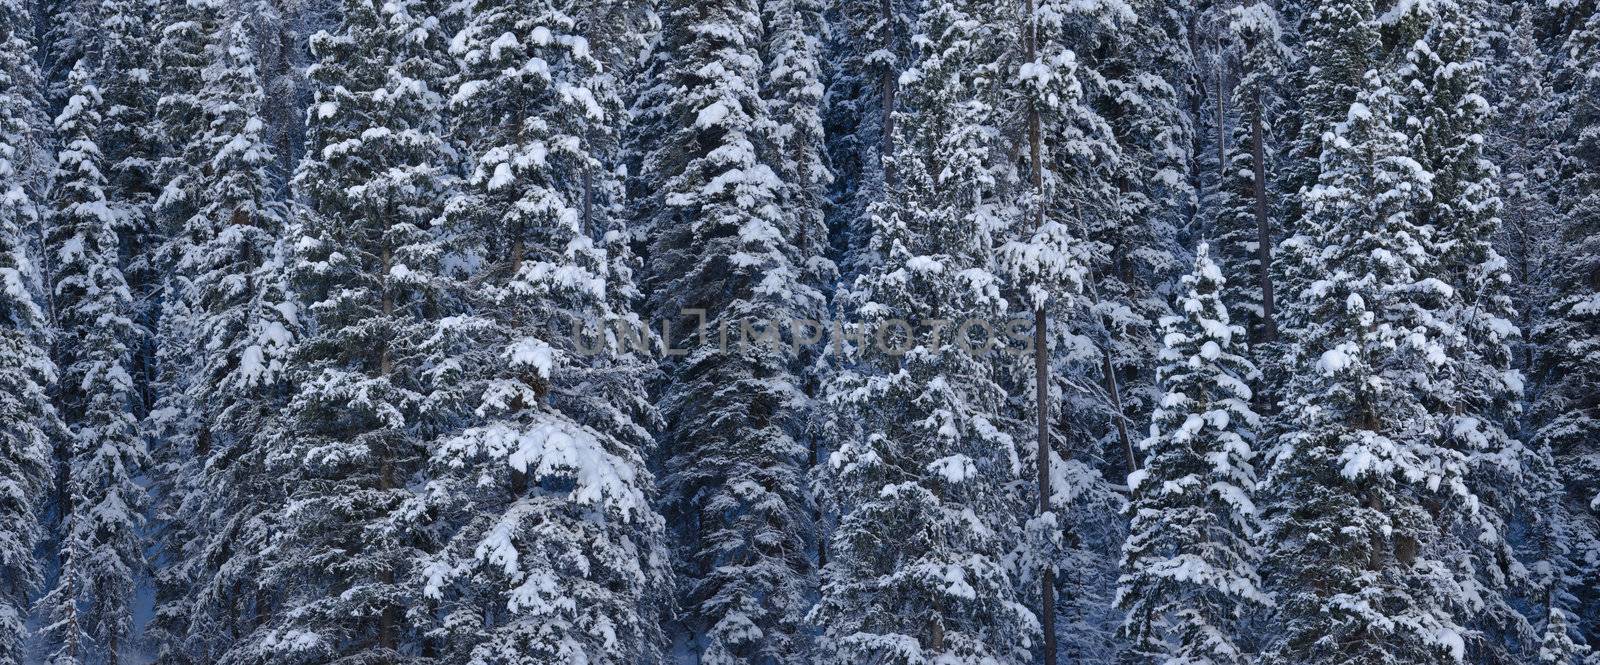 A dense coniferous forest after a snow storm, Gallatin National Forest, Montan, USA by CharlesBolin